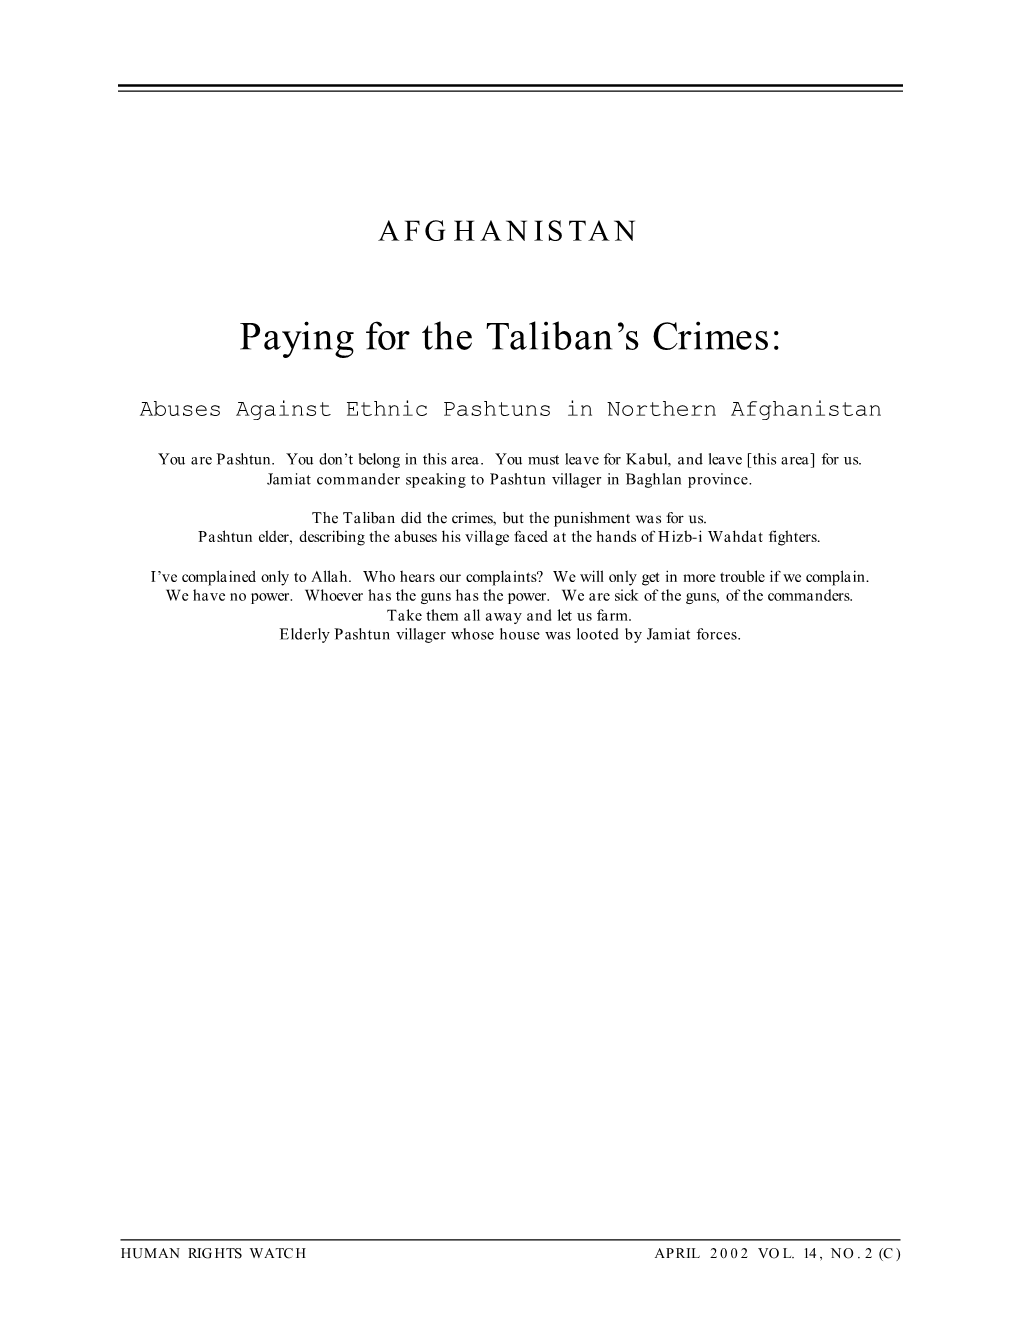 Paying for the Taliban's Crimes